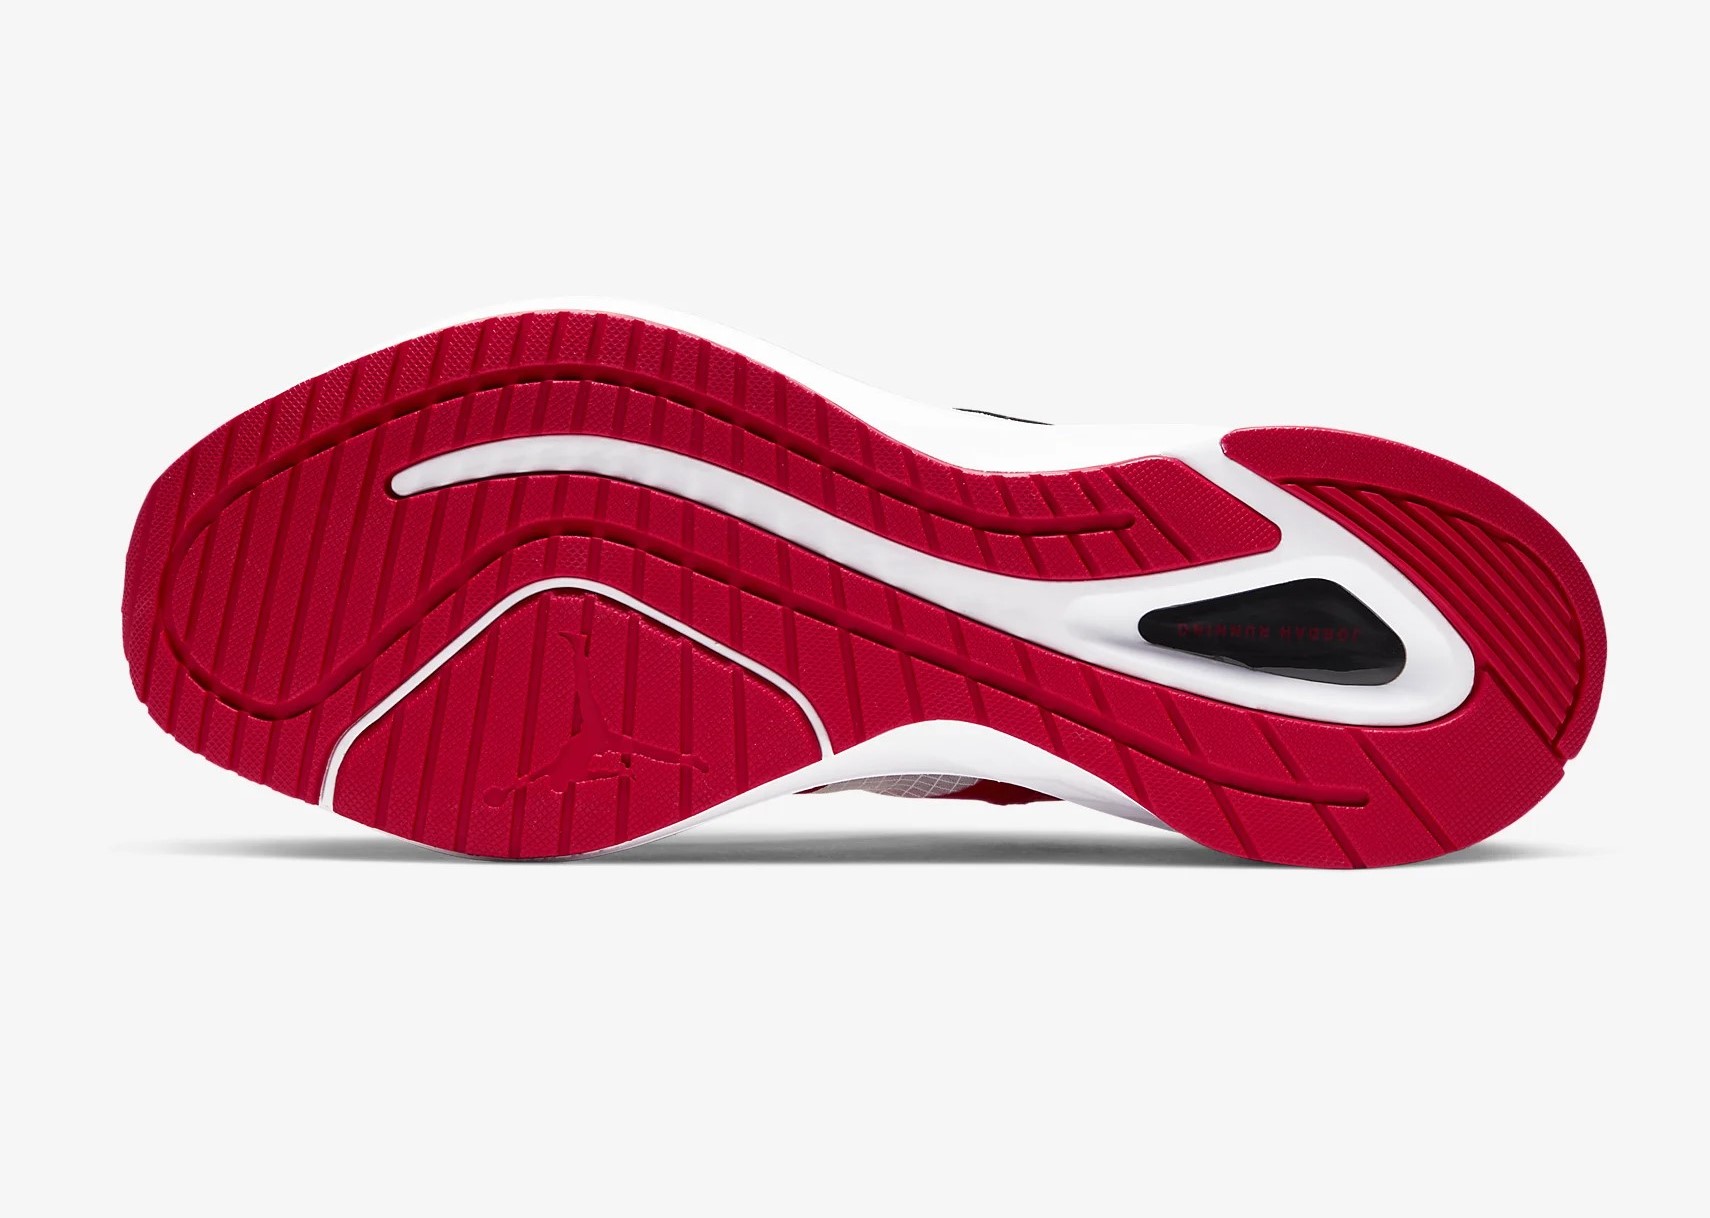 The Jordan 85 Racer Is A Running Sneaker Tribute To The Classic AJ1 - Maxim